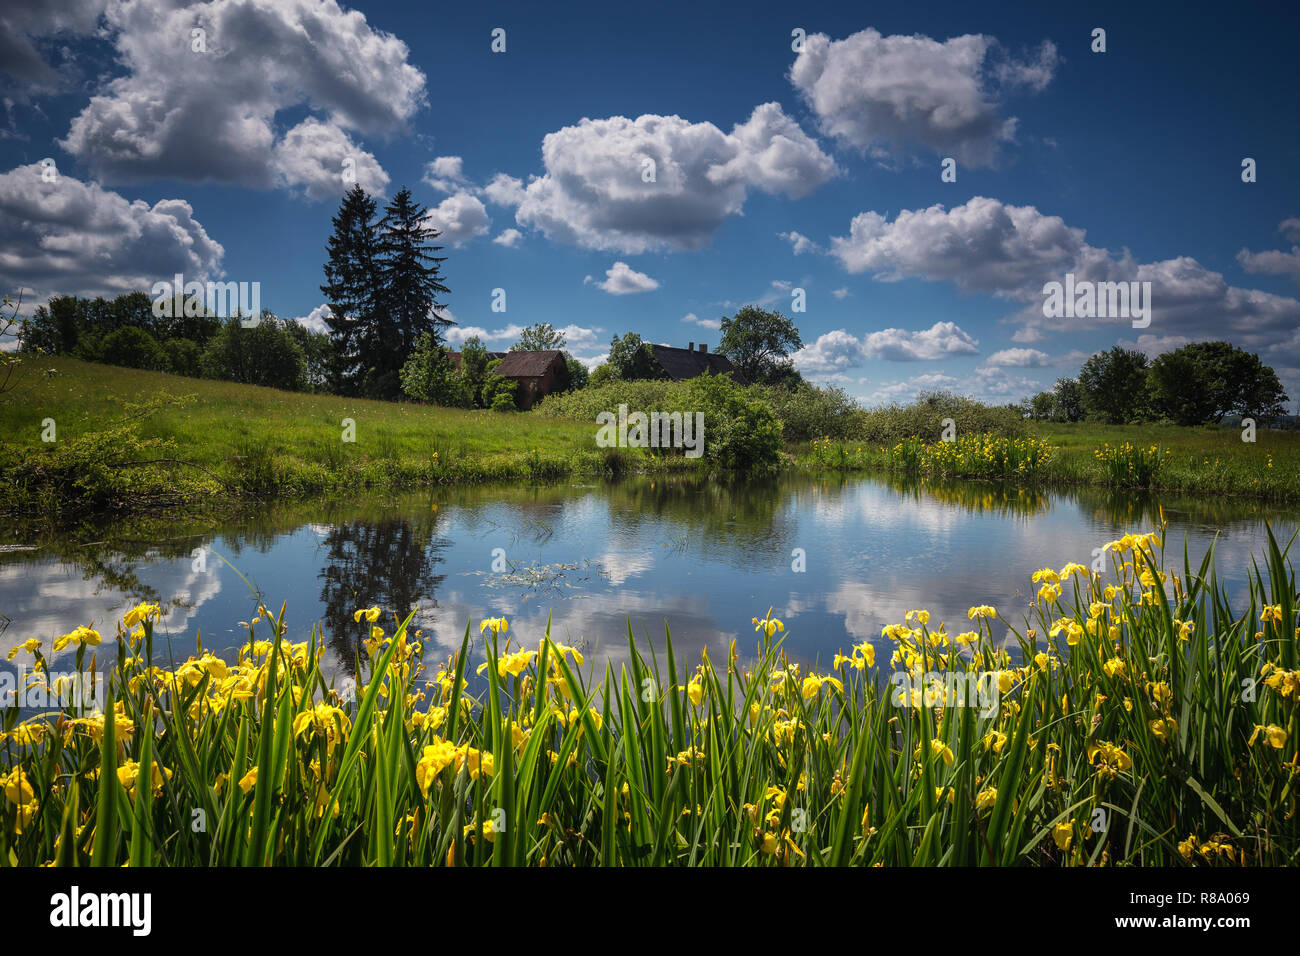 Spring time in polish countryside. Green vegetation on meadow. Small water pond. Stock Photo